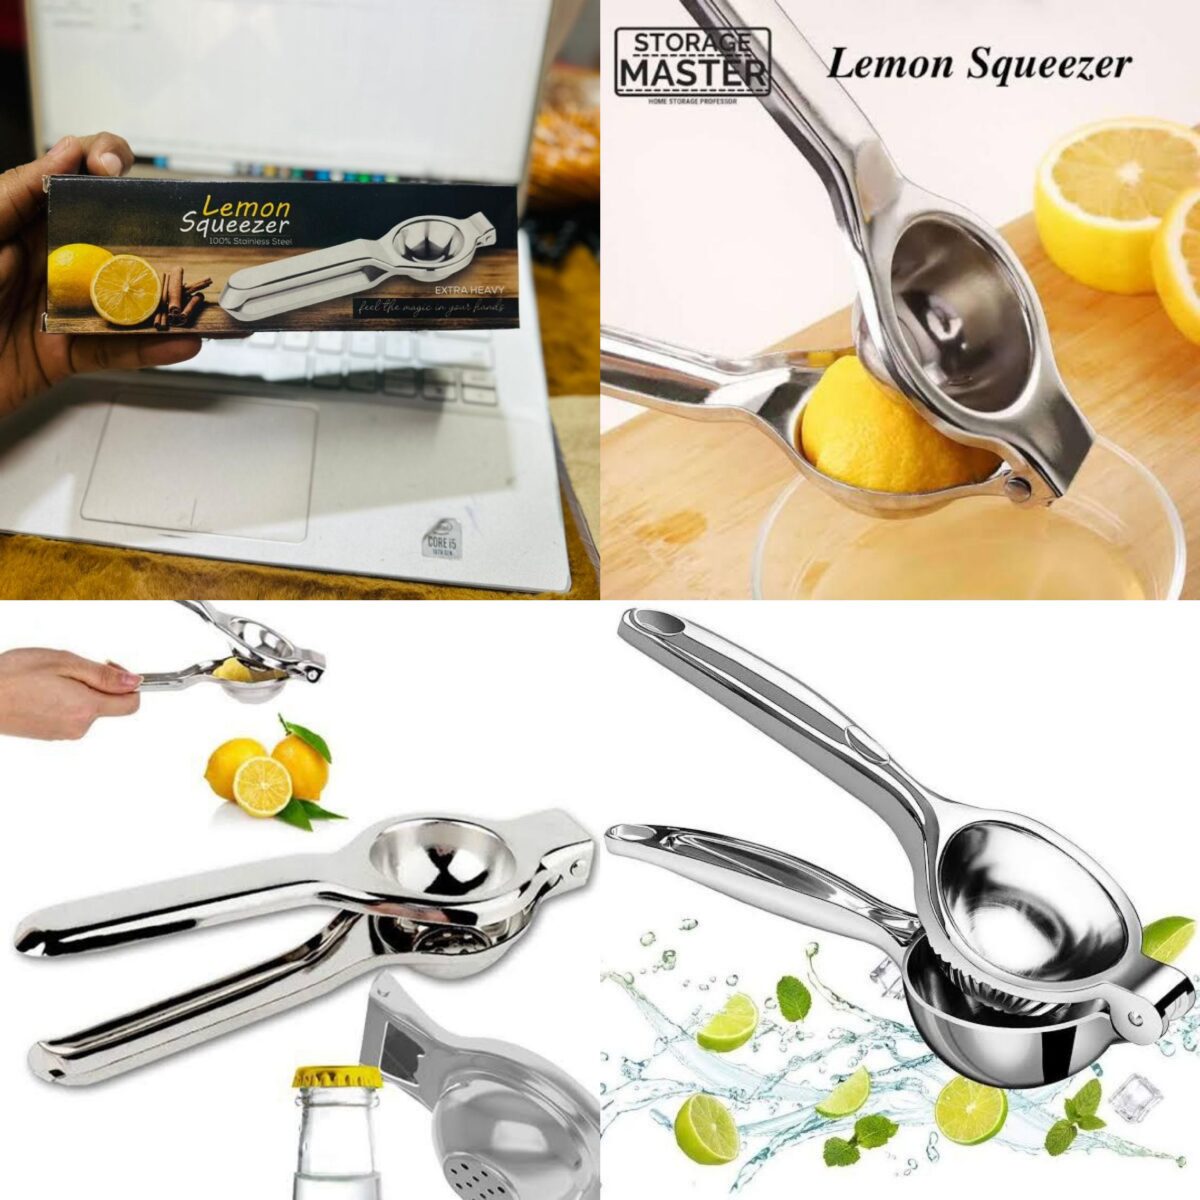 The Steel Lemon Squeezer with Heavy Box Packing is a robust and efficient kitchen tool designed for effortlessly extracting juice from lemons. Crafted from durable steel, this lemon squeezer is built to withstand heavy use and is guaranteed to last for an extended period. The heavy box packing ensures that the product reaches you in perfect condition, protecting it from any potential damage during transportation.